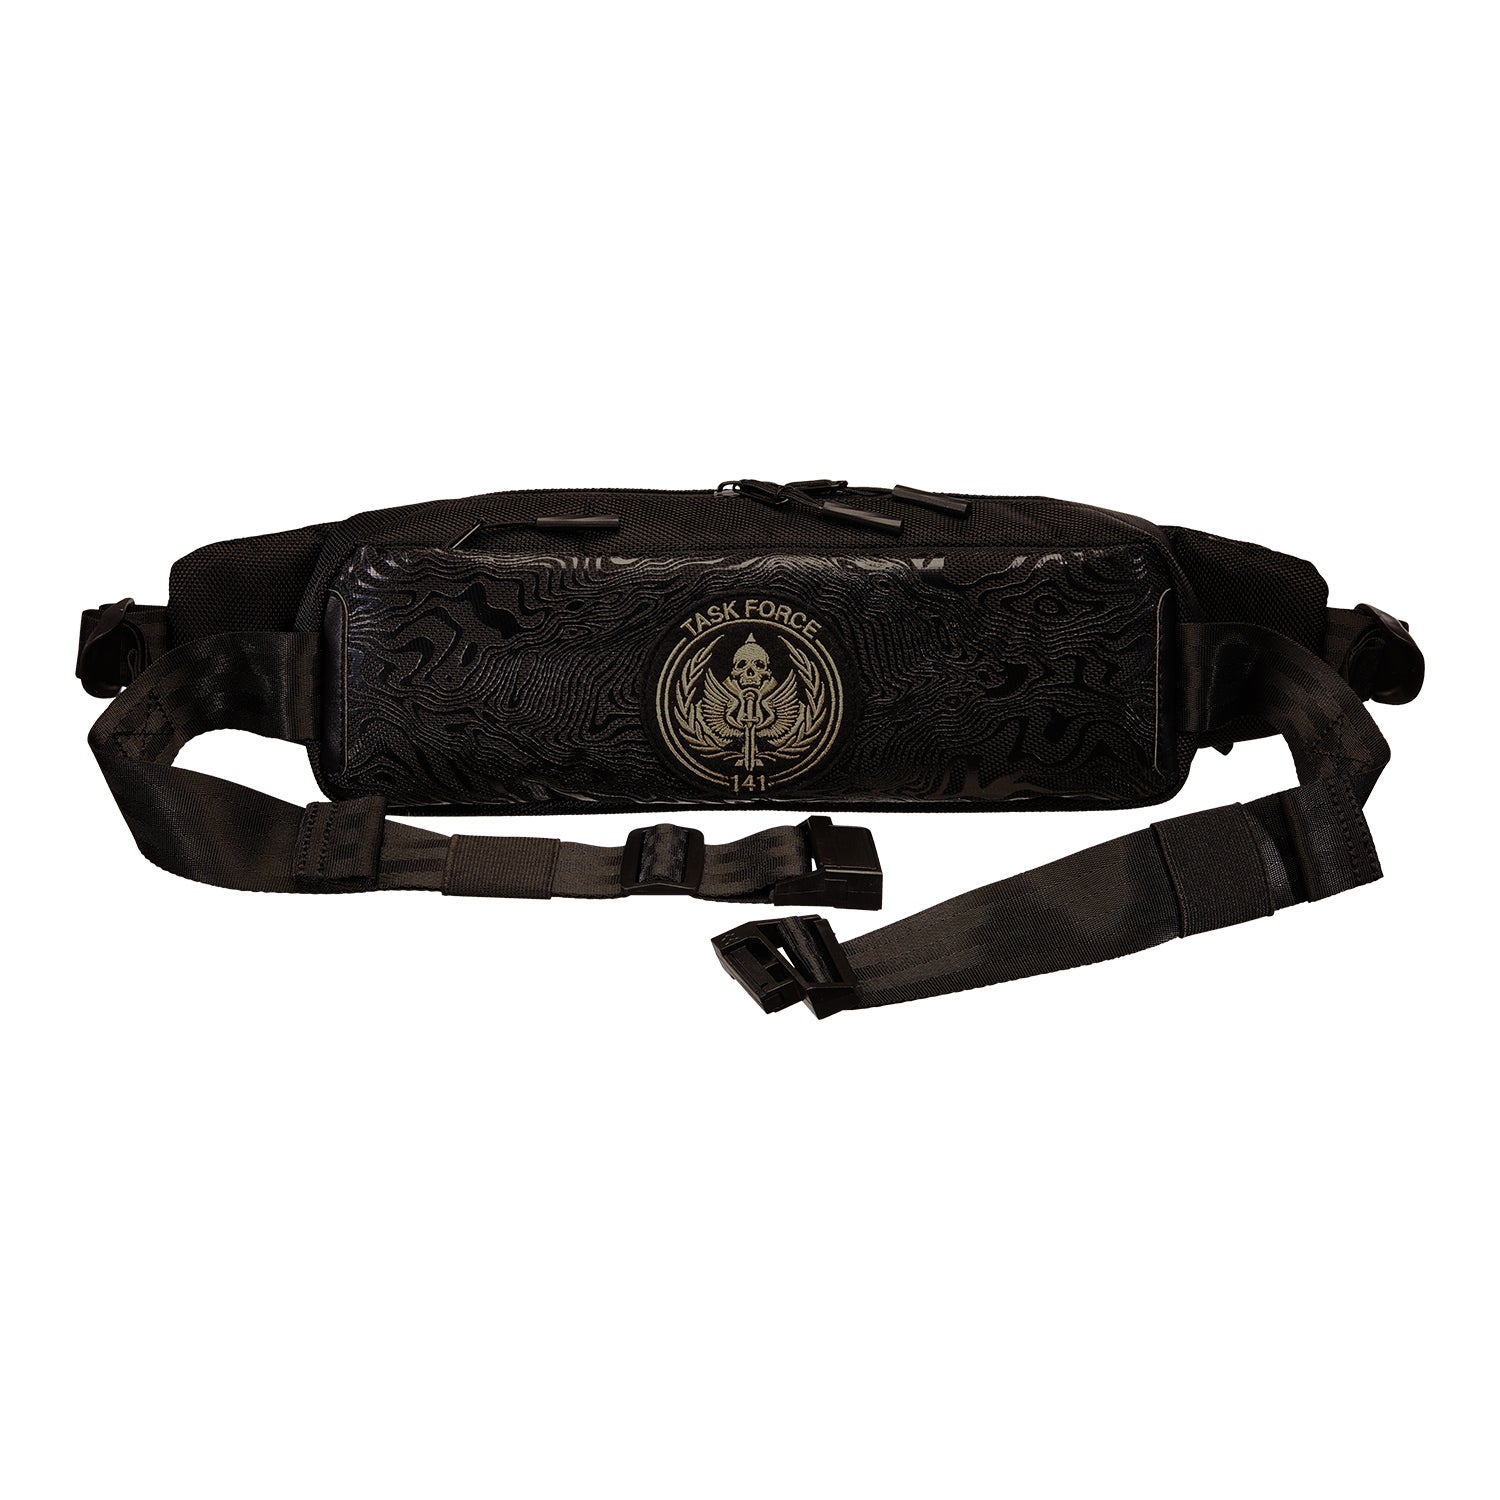 Call of Duty Task Force 141 Crossbody Sling Bag - Front View Unclipped